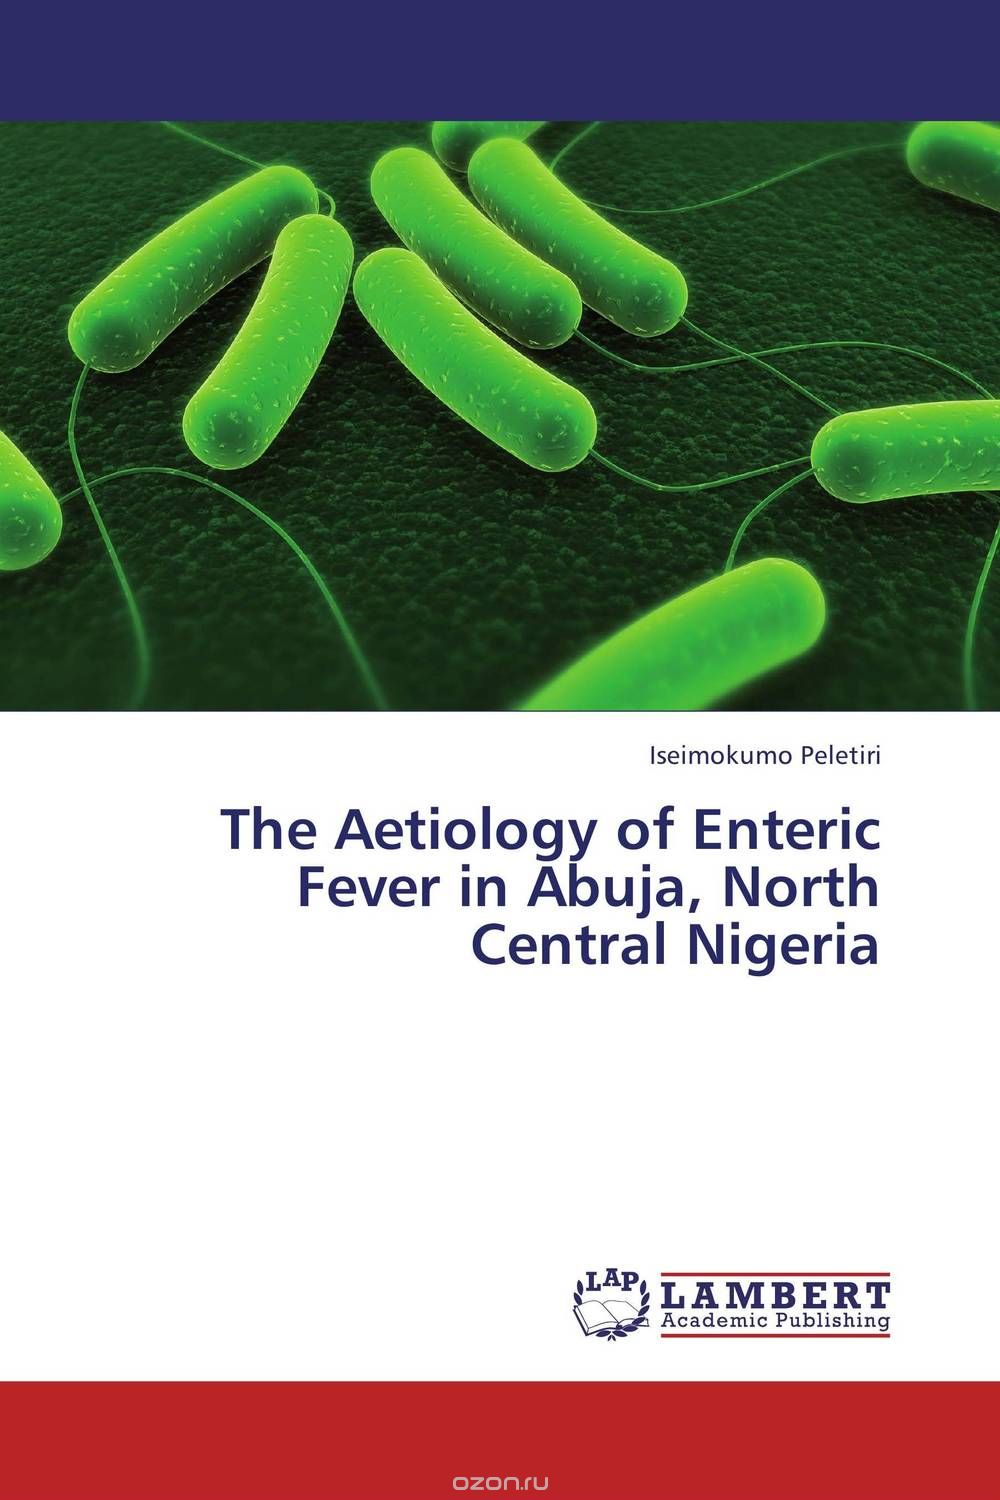 The Aetiology of Enteric Fever in Abuja, North Central Nigeria